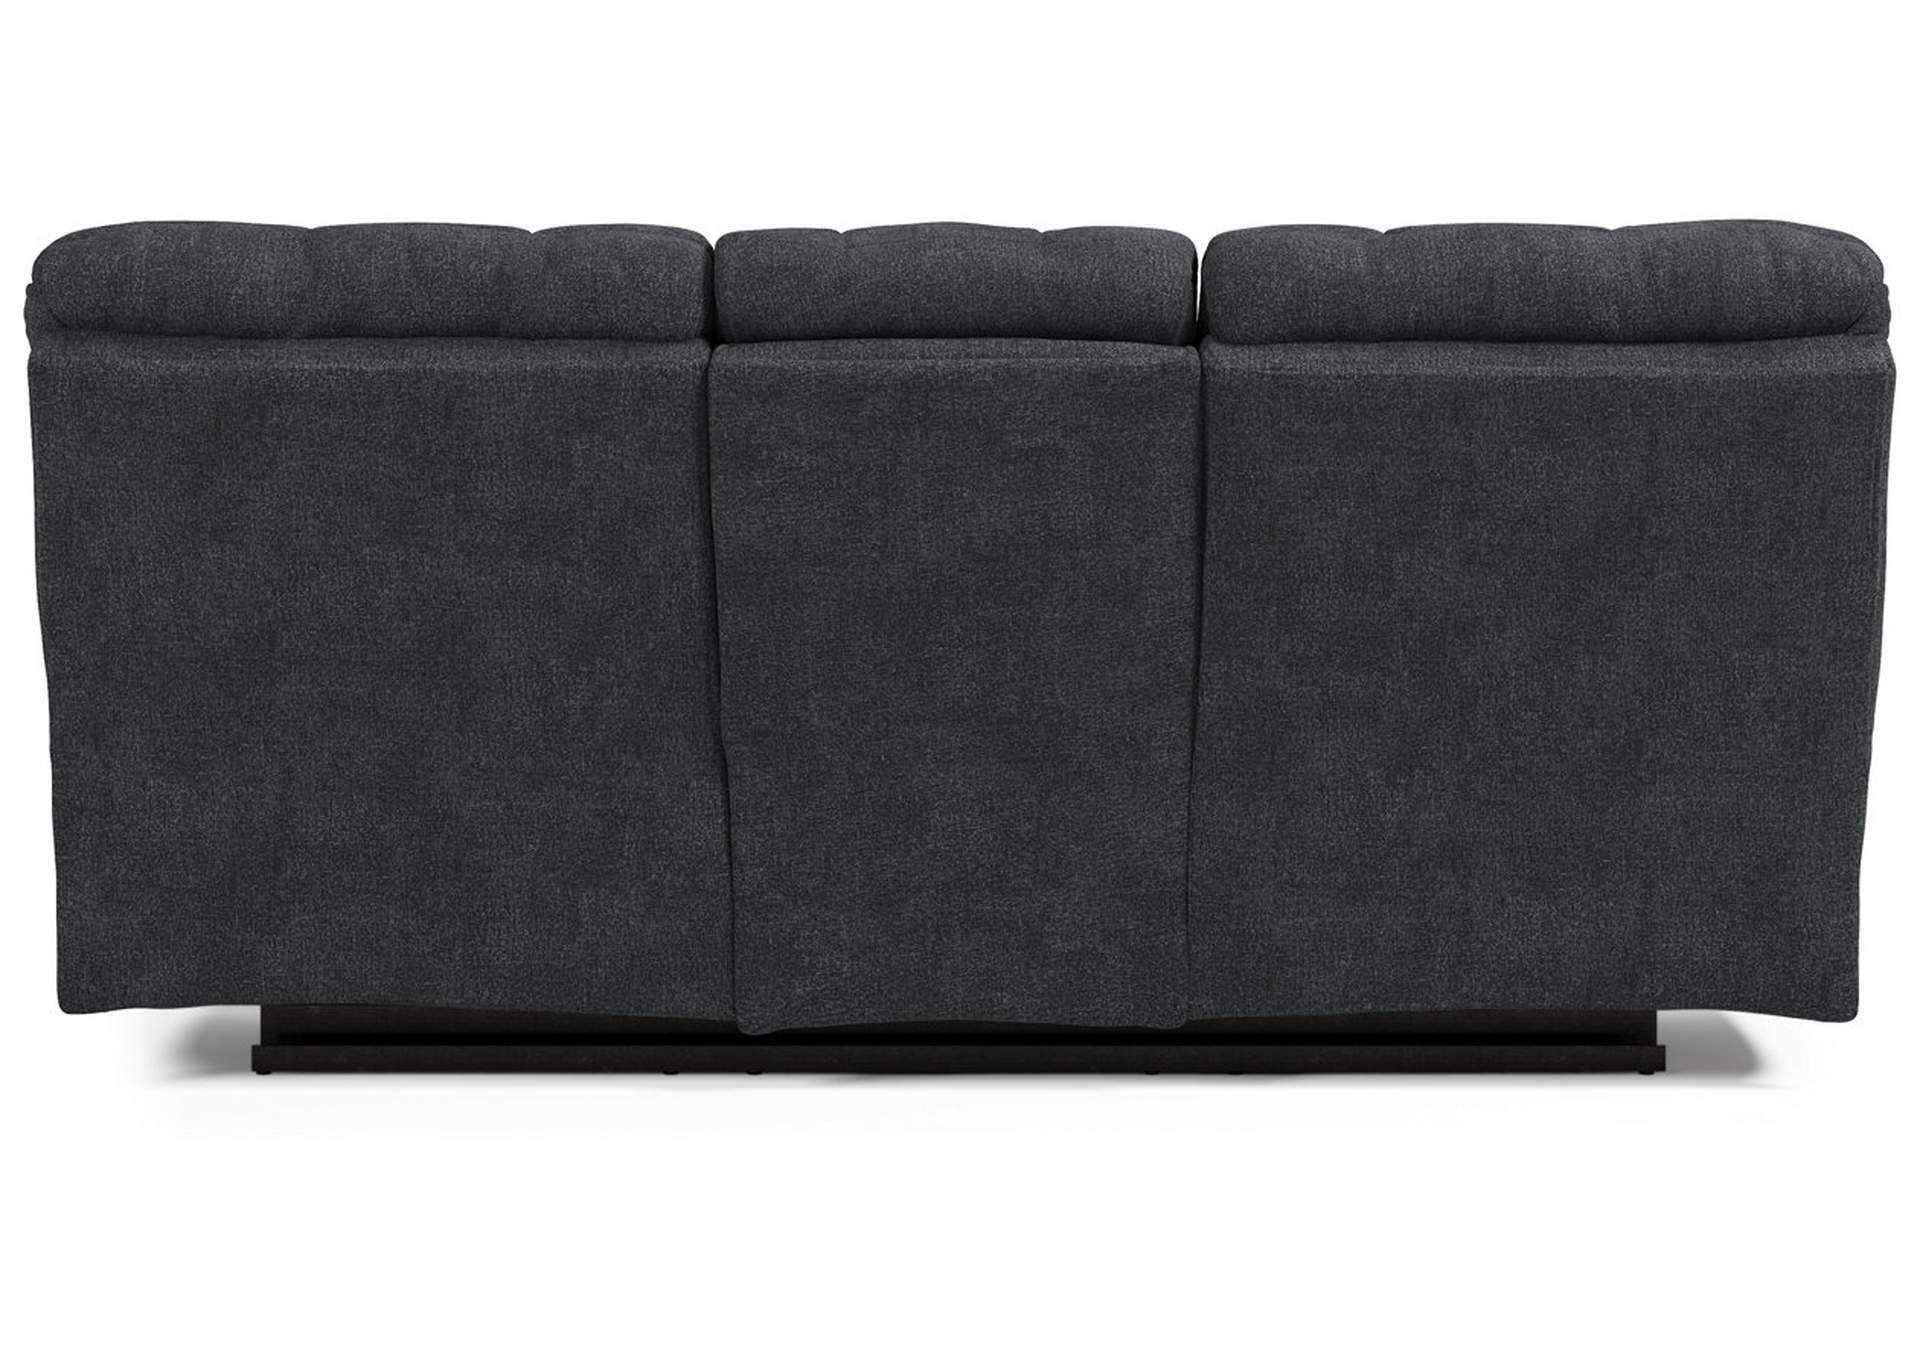 Wilhurst Reclining Sofa with Drop Down Table,Signature Design By Ashley